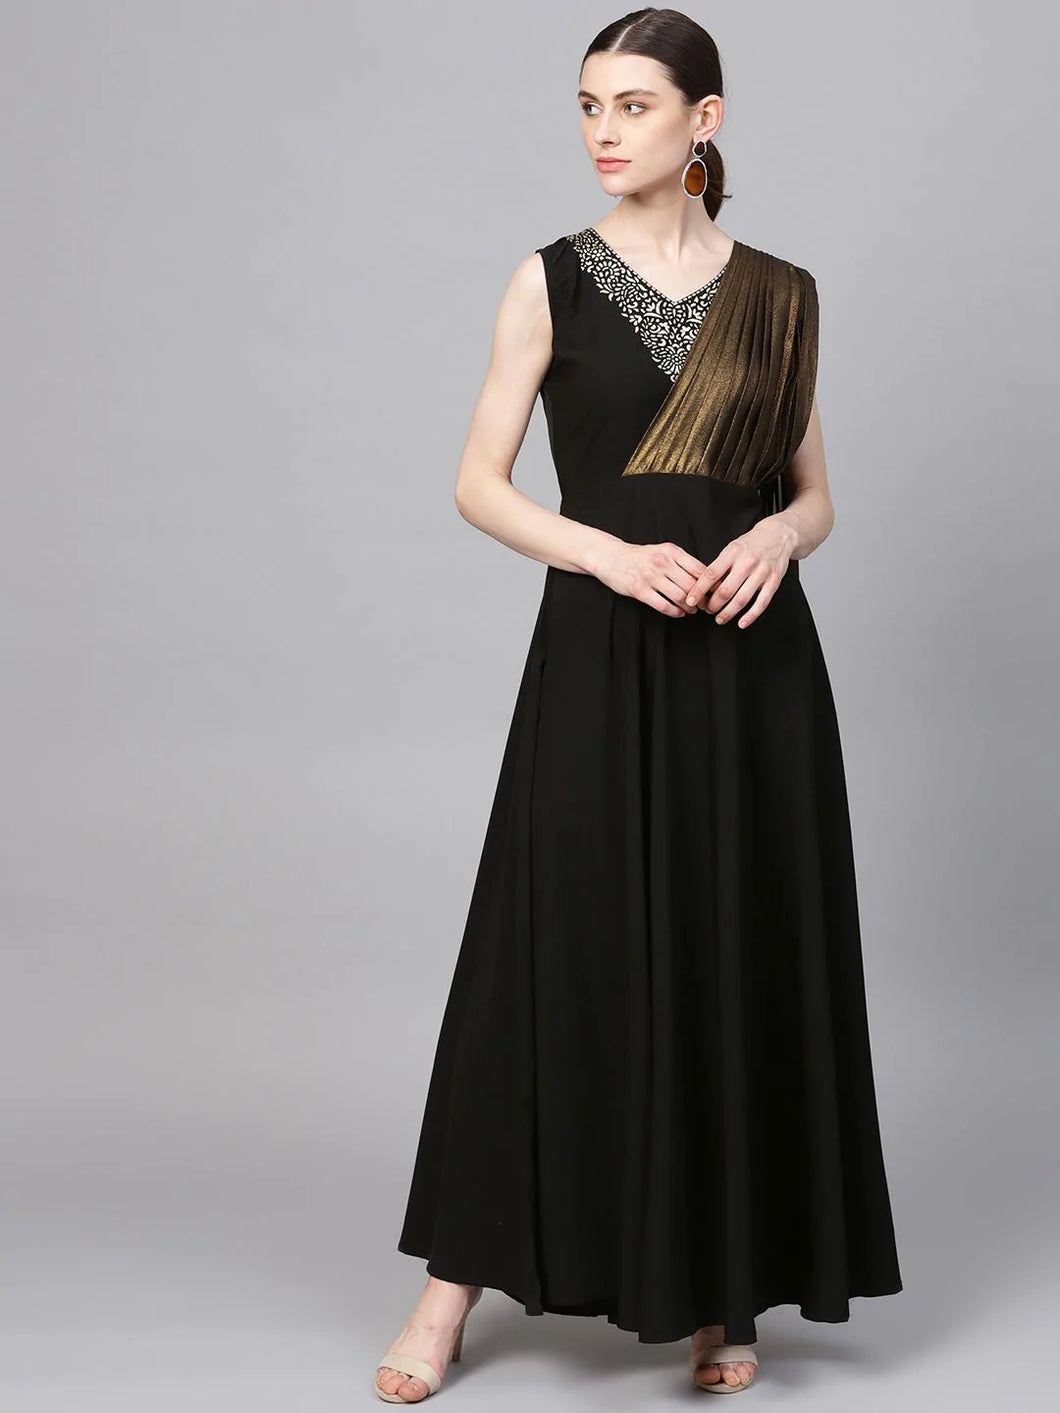 Party Wear & Festival Wear Latest Fashion Black Crepe Dress For Women and Girls